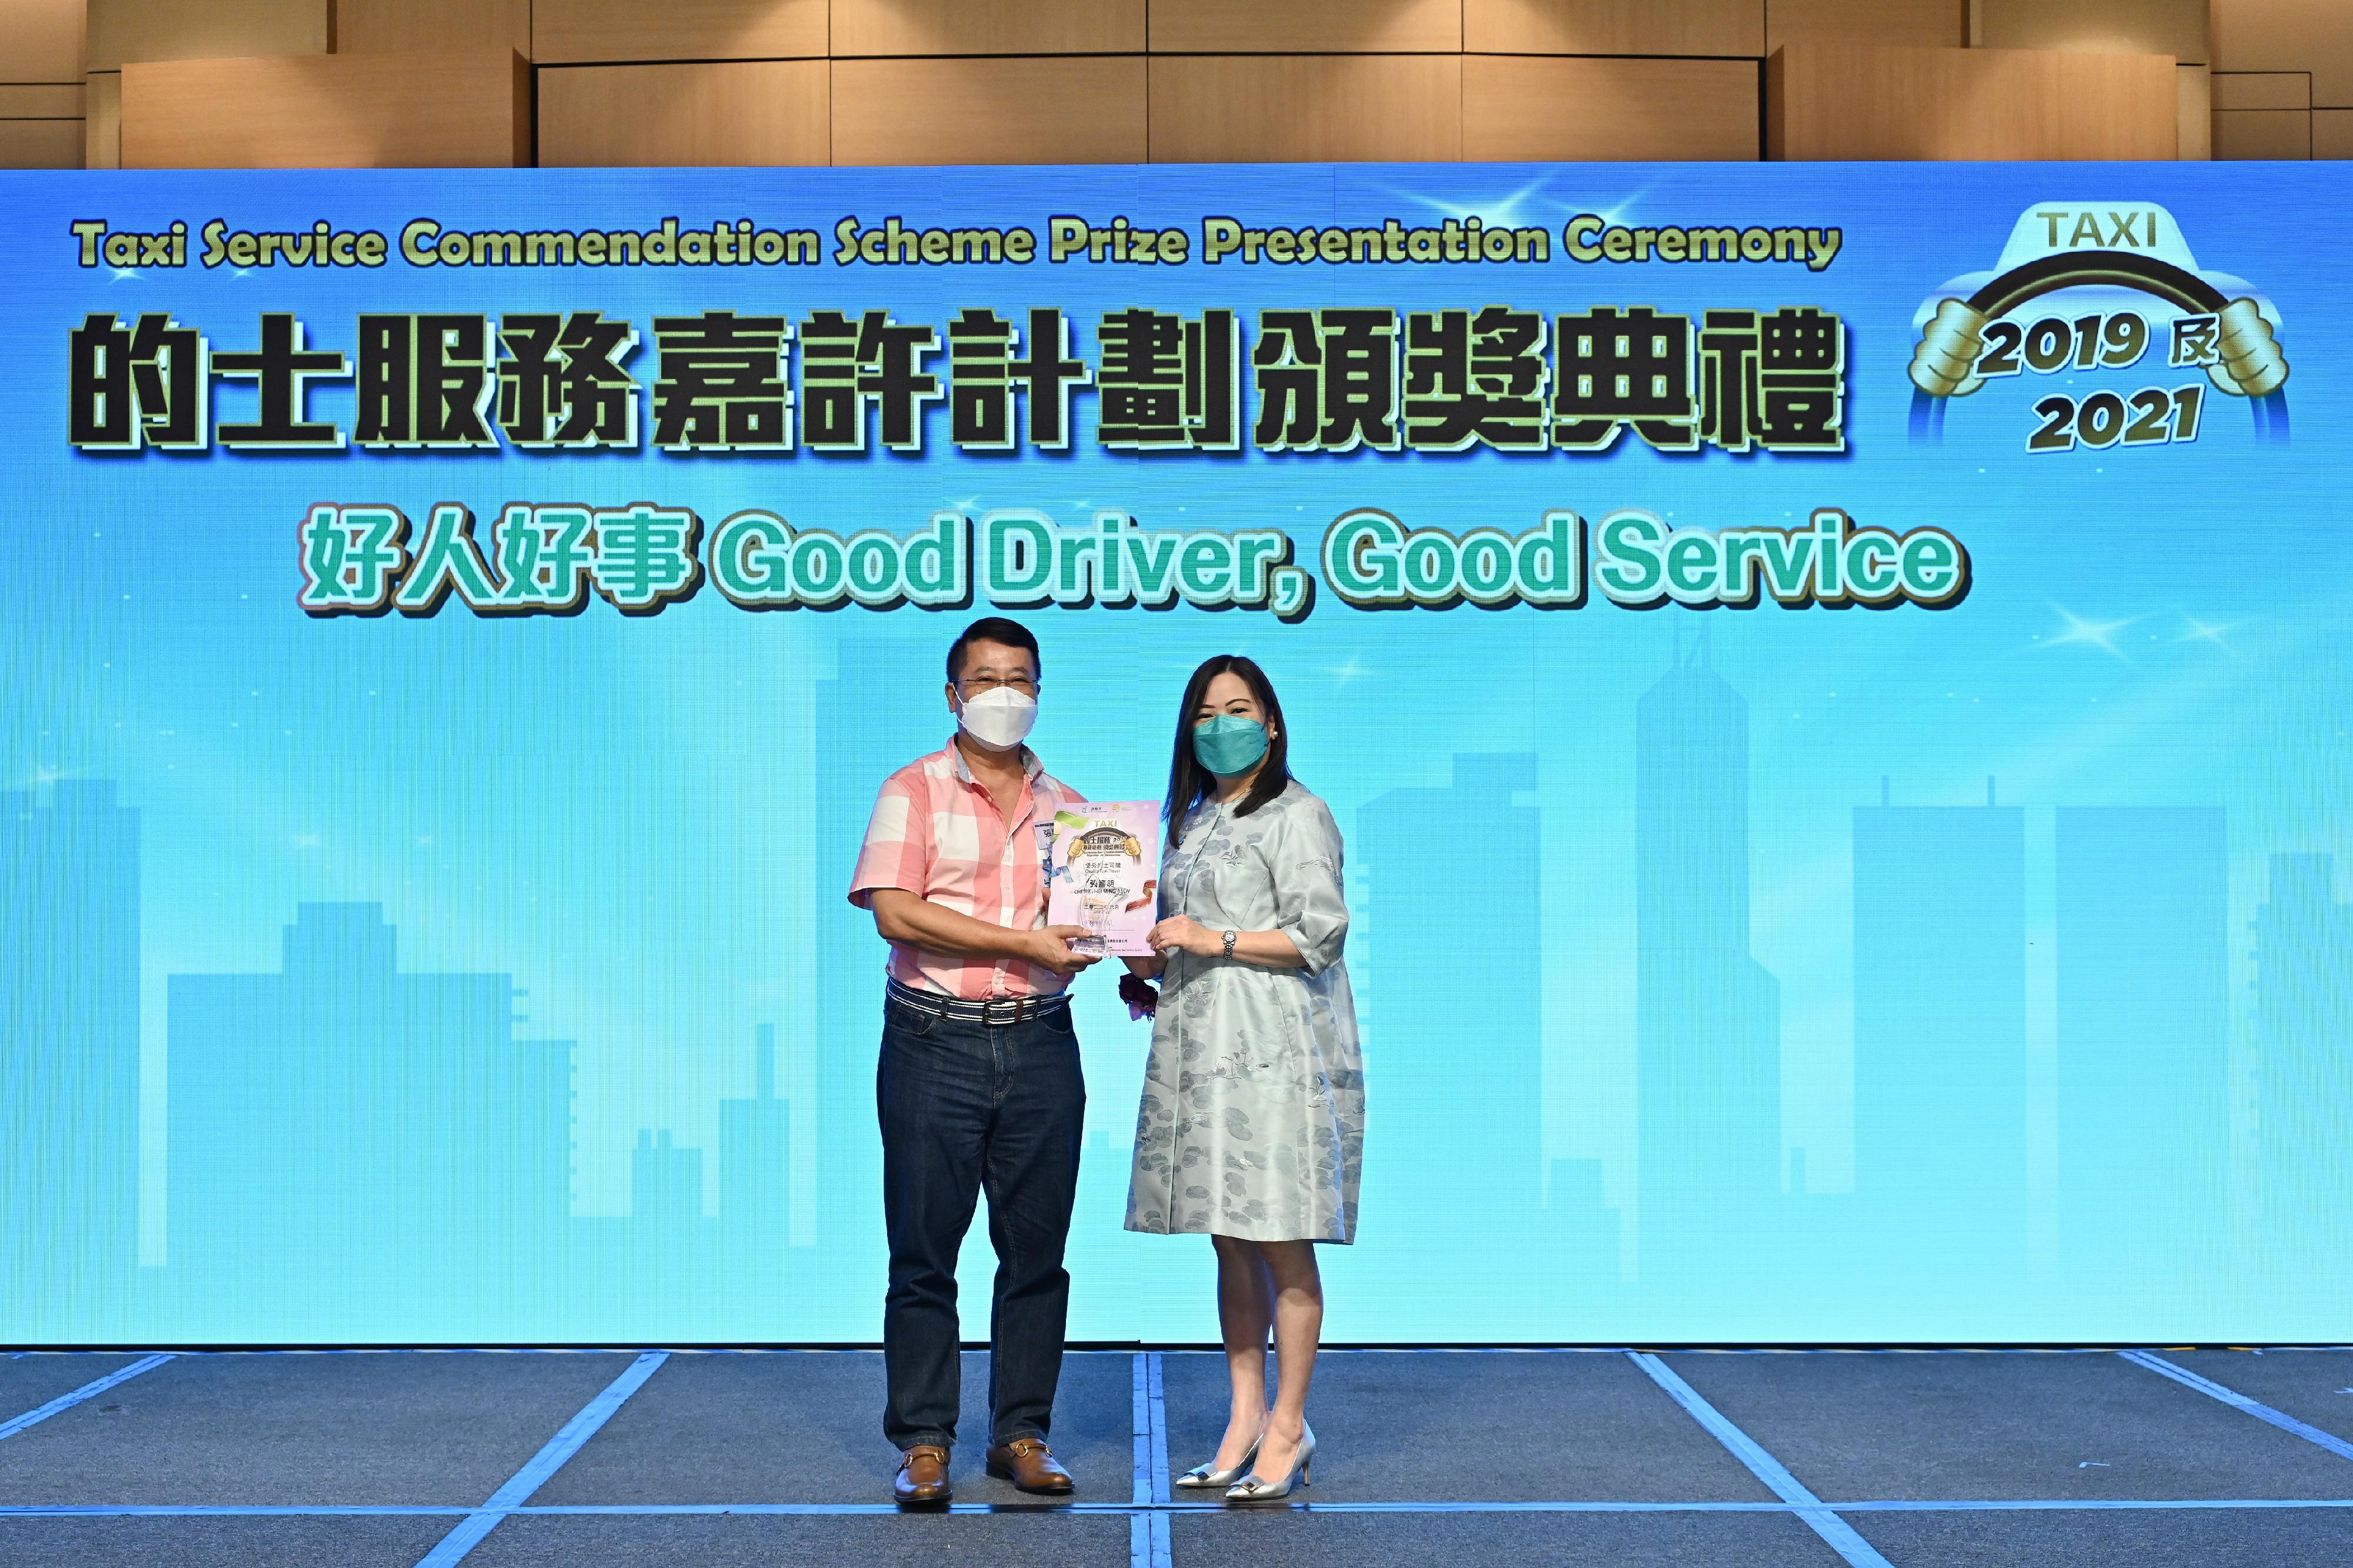 The prize presentation ceremony for the Taxi Service Commendation Scheme 2019 and 2021 was held today (June 24). The Committee on Taxi Service Quality Chairman and the Commissioner for Transport, Miss Rosanna Law (right), is pictured with the "Good Driver, Good Service" awardee at the ceremony.